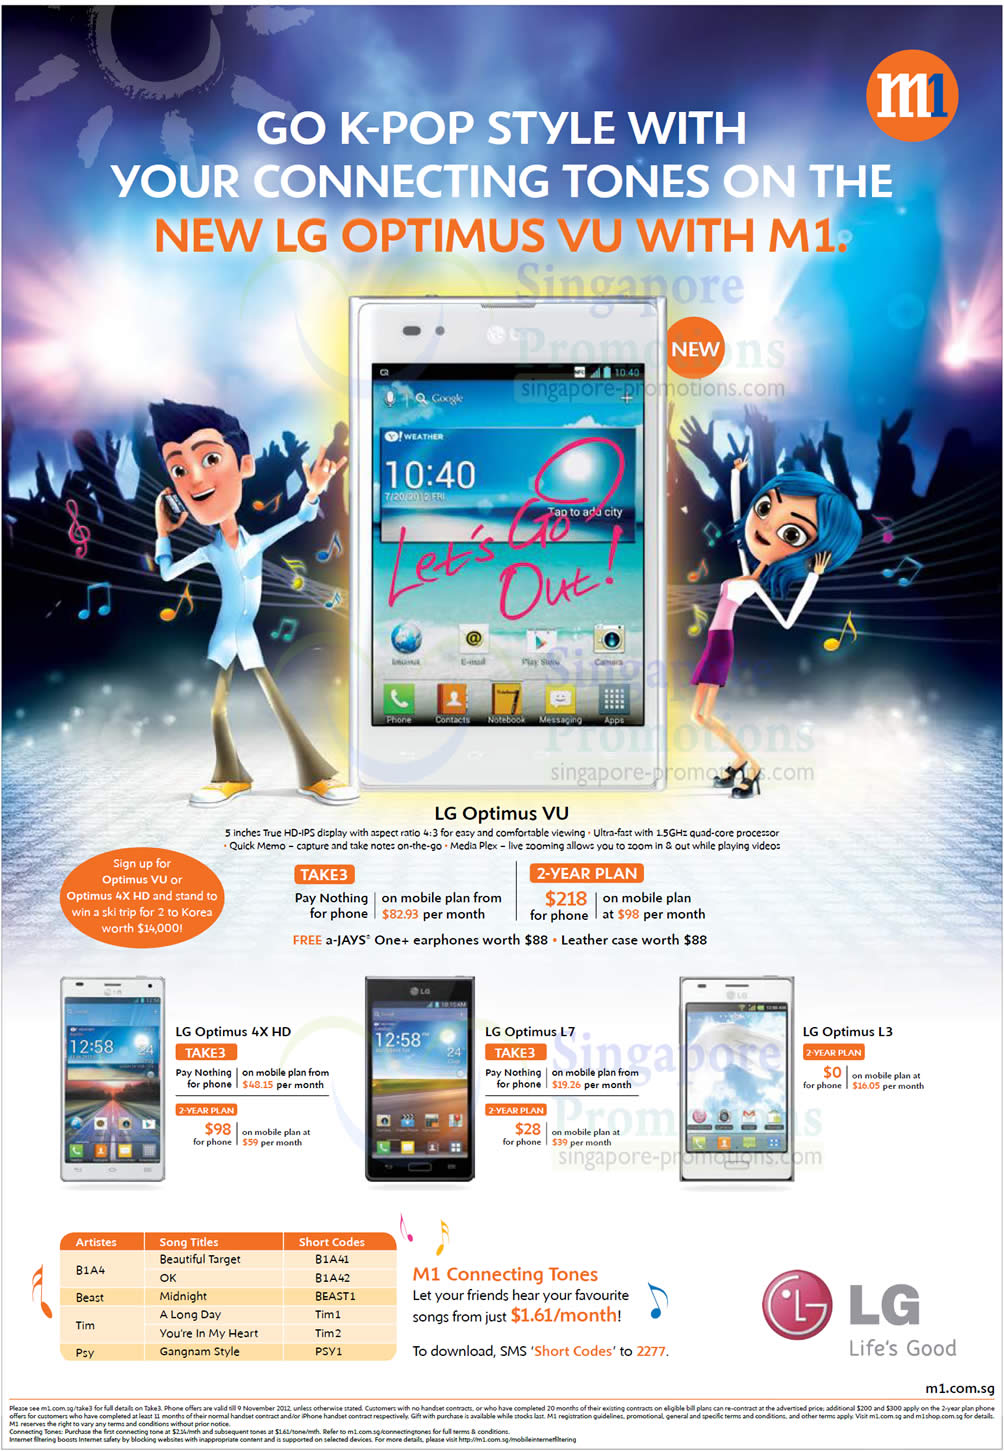 Featured image for M1 Smartphones, Tablets & Home/Mobile Broadband Offers 3 - 9 Nov 2012